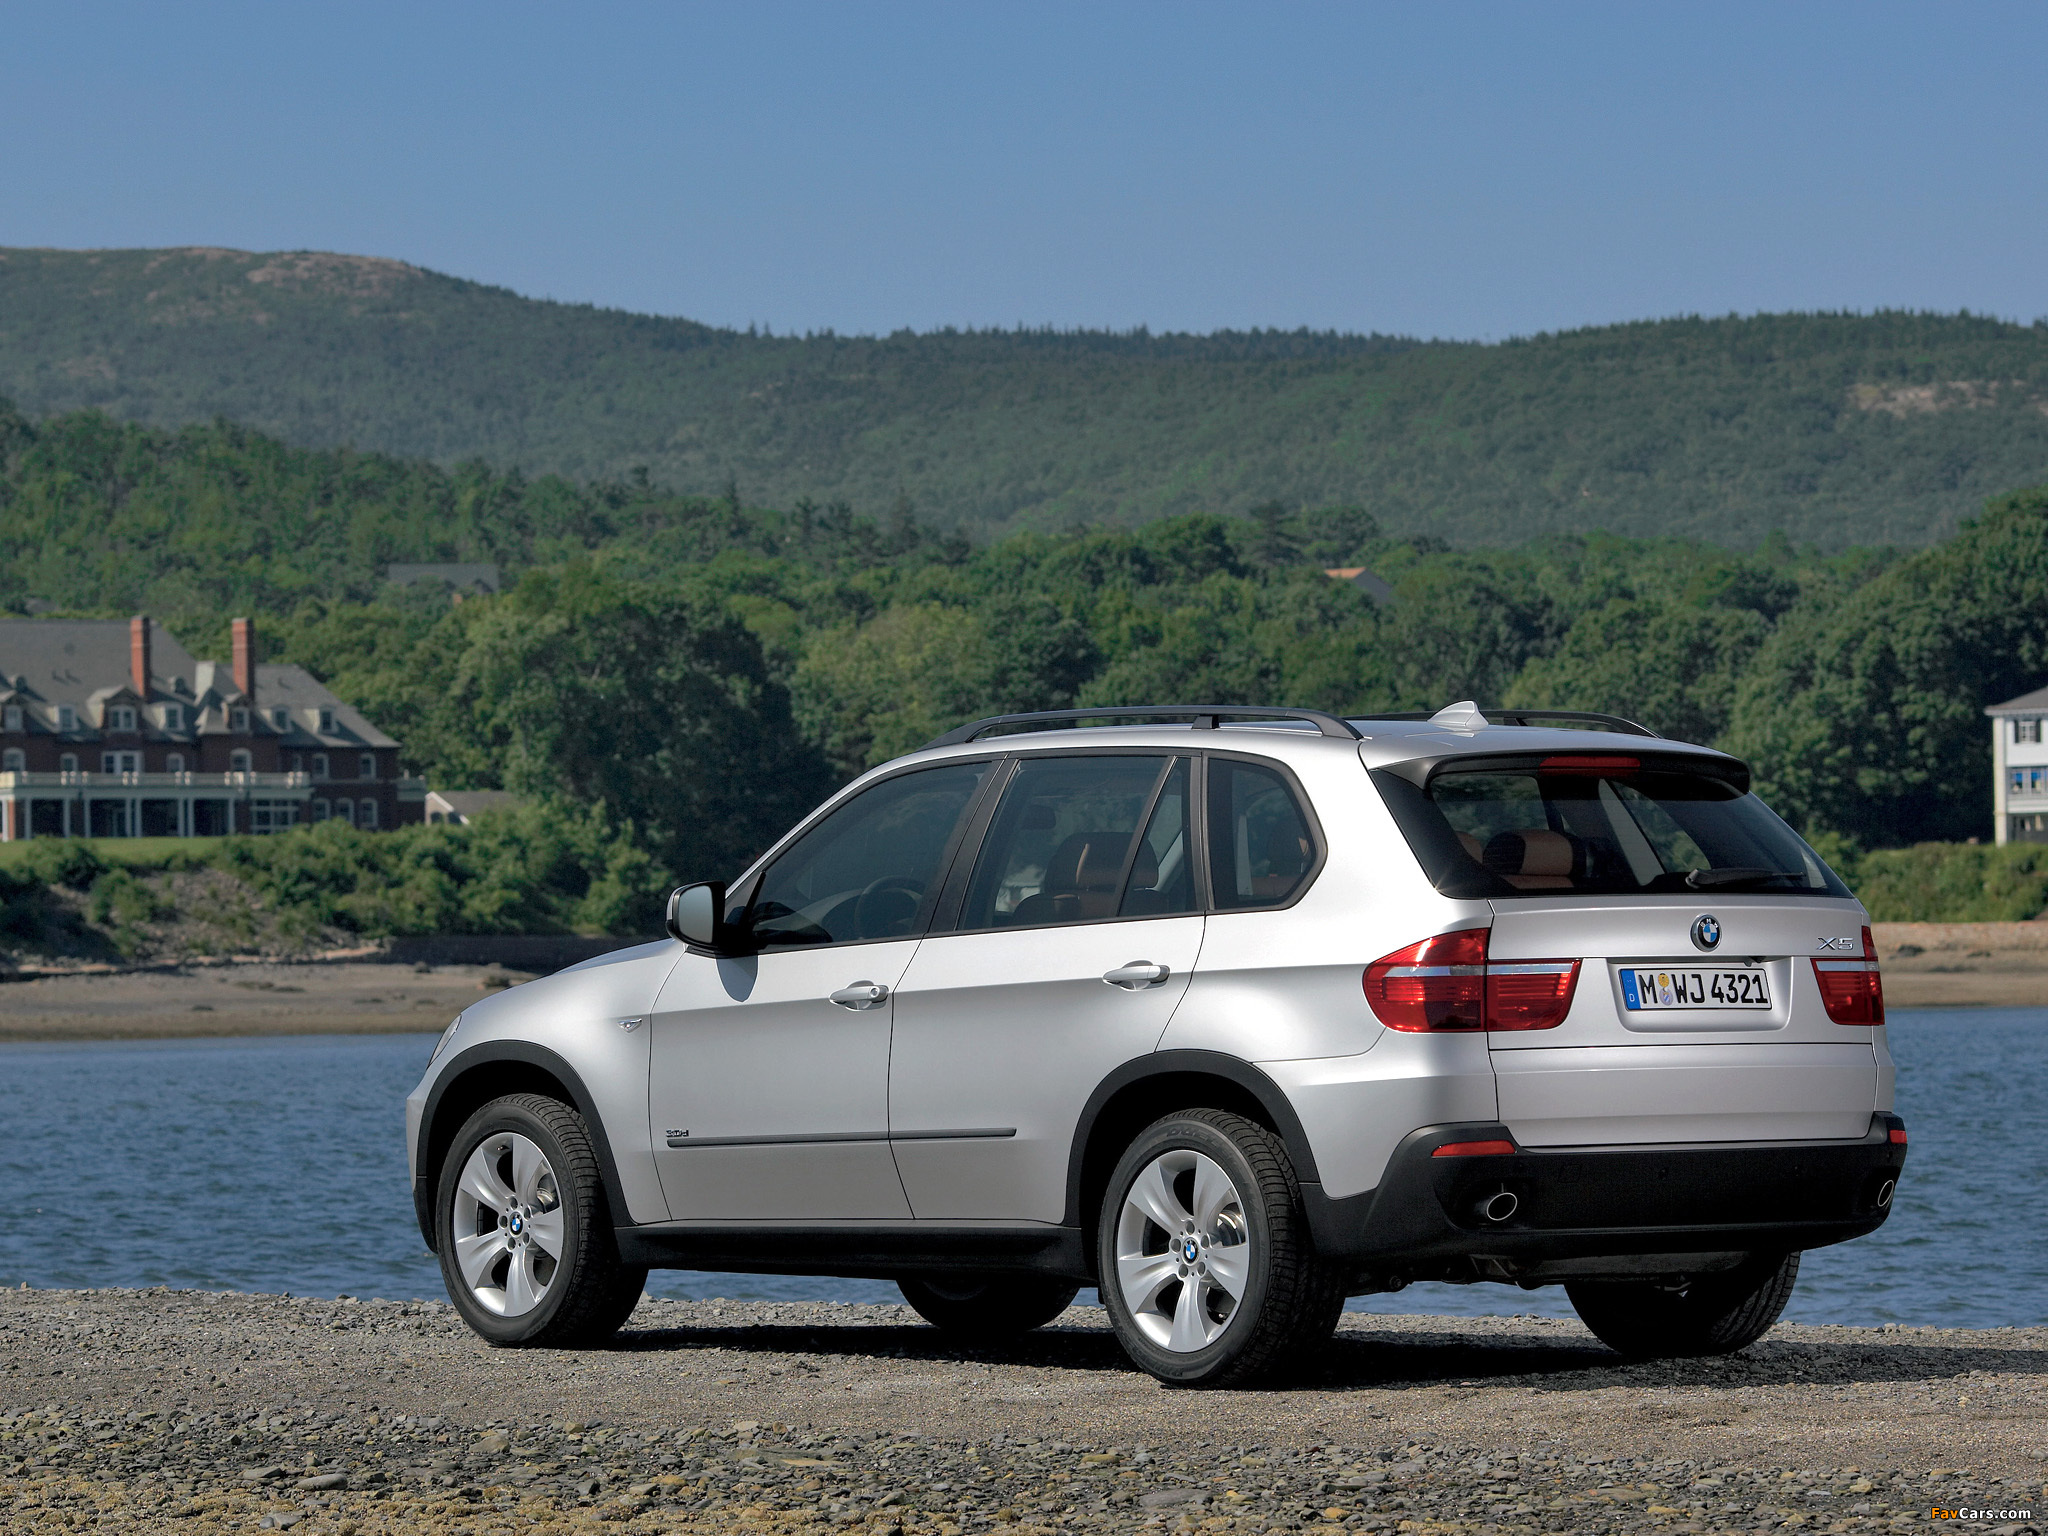 BMW X5 3.0d (E70) 2007–10 pictures (2048 x 1536)